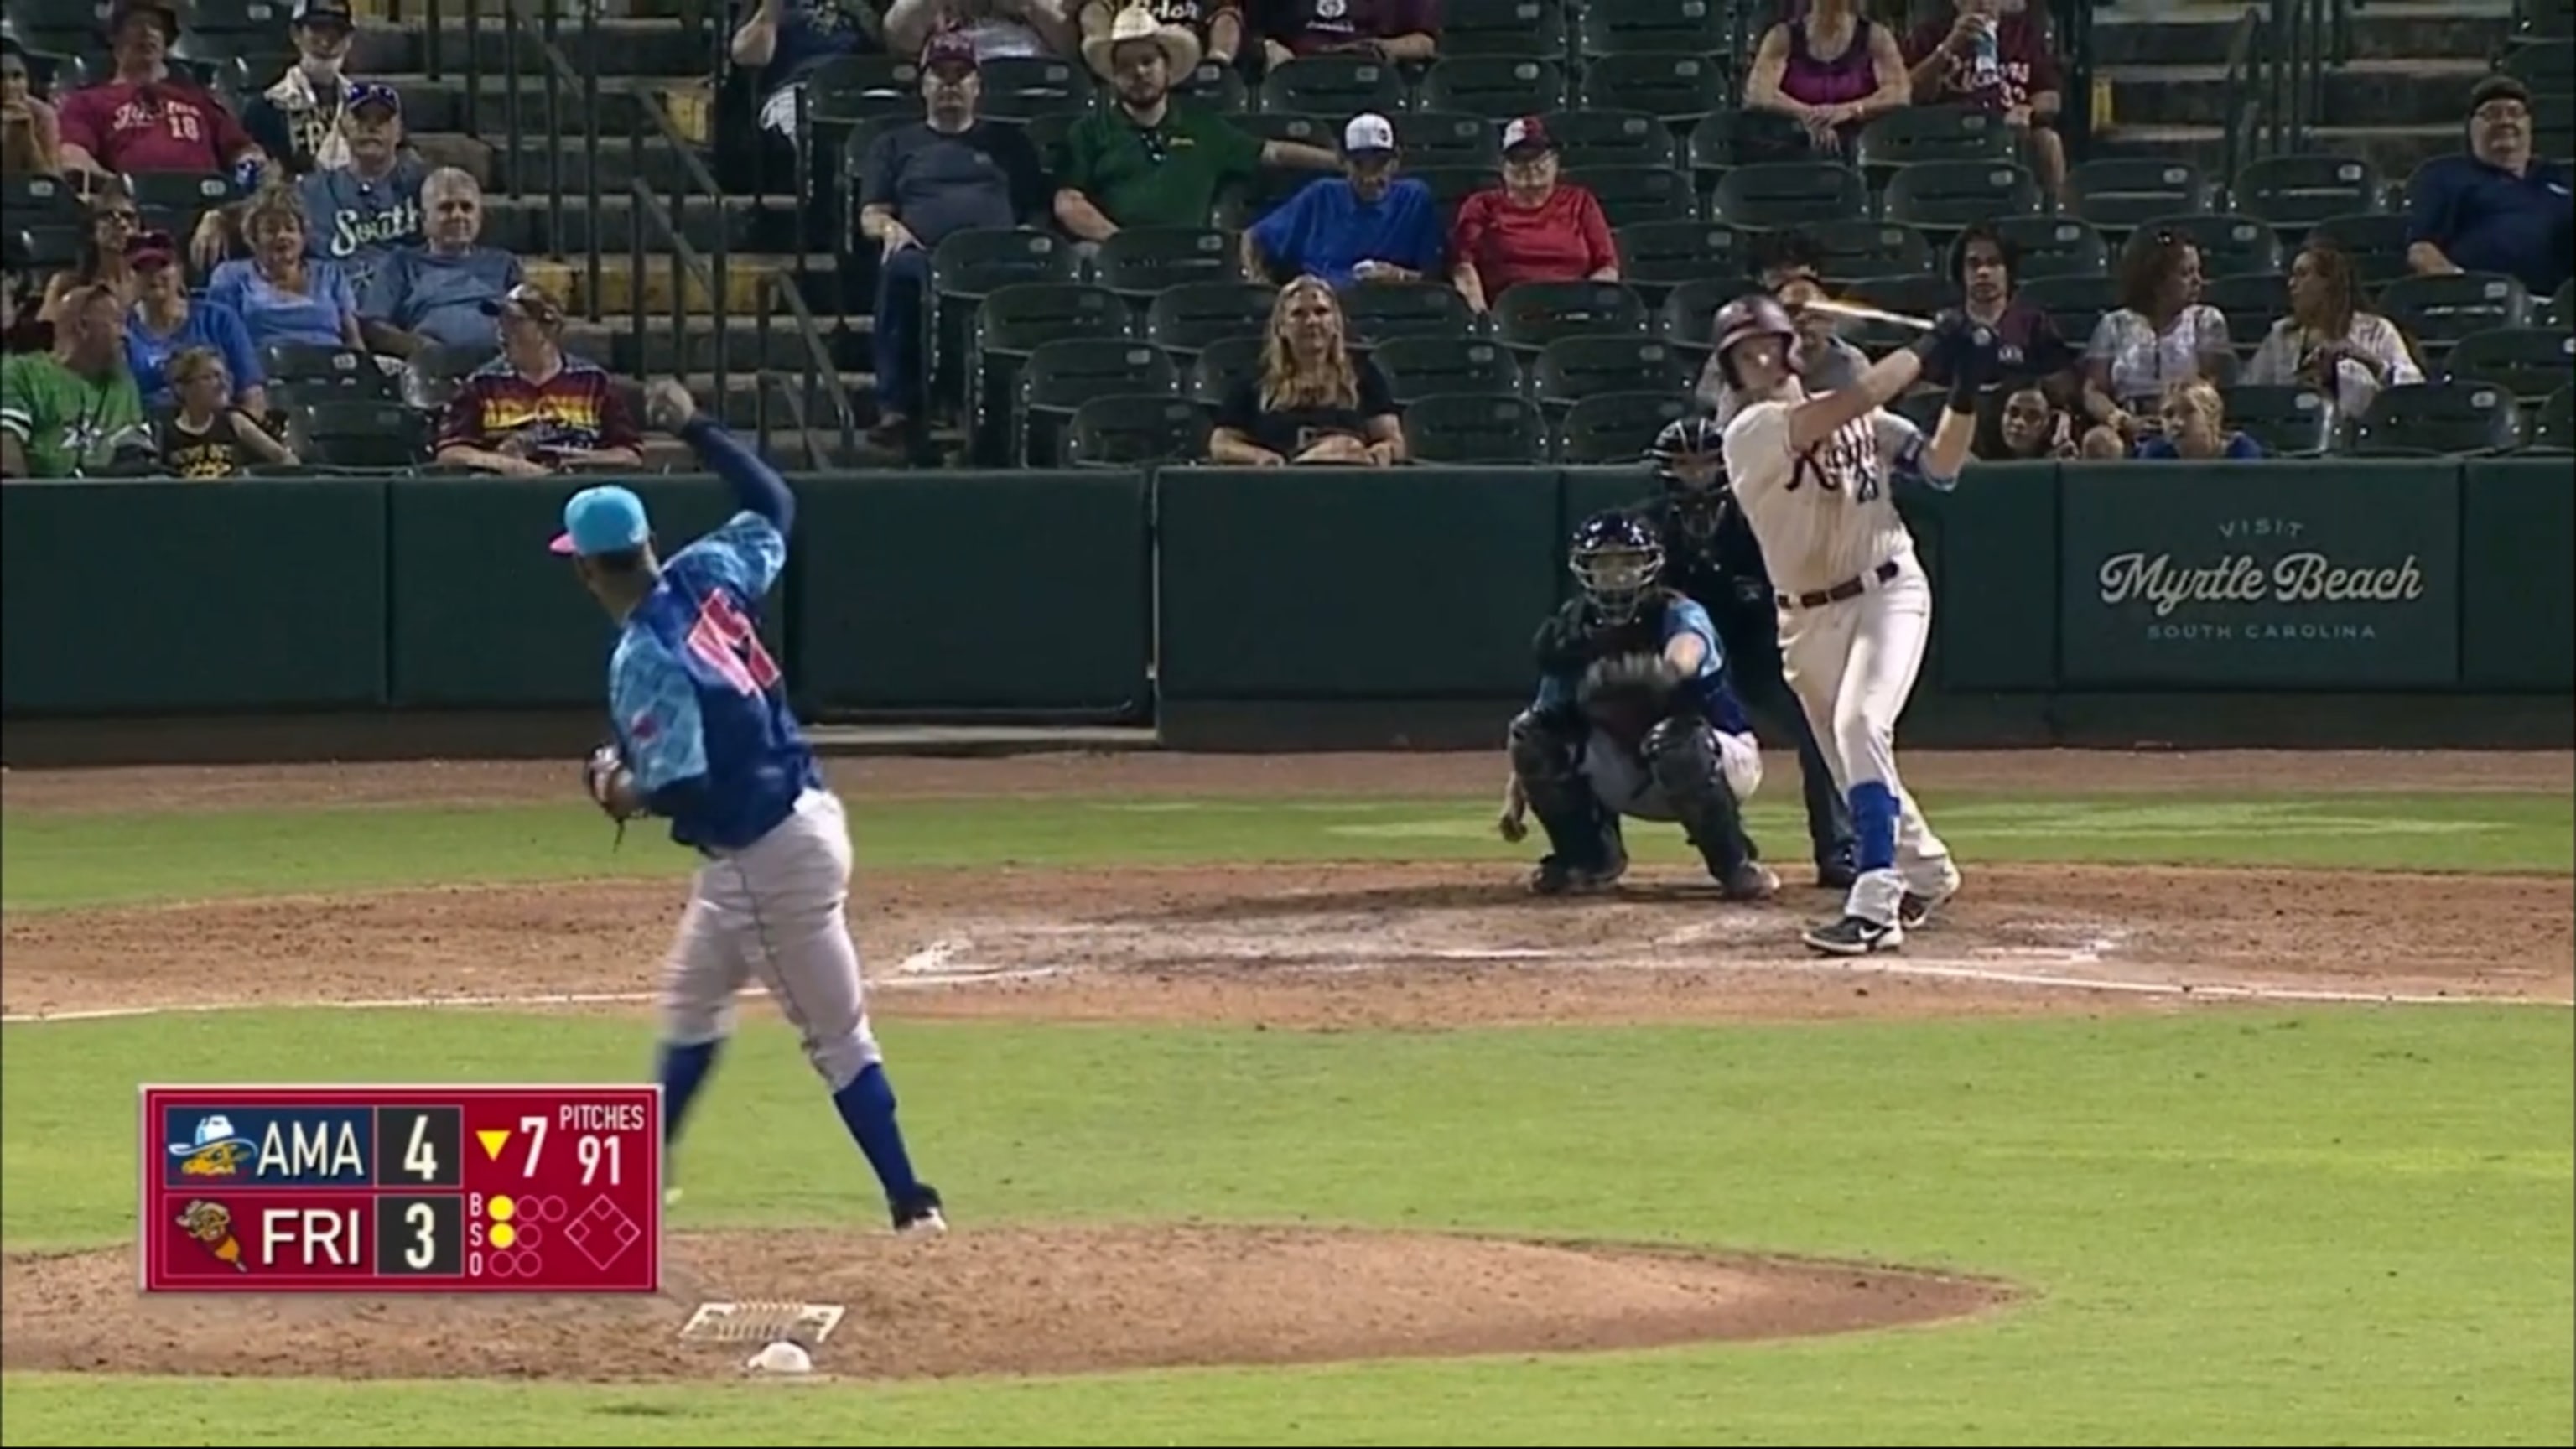 Jack Leiter Pitching Highlights From Pro-Baseball Debut With Frisco  RoughRiders